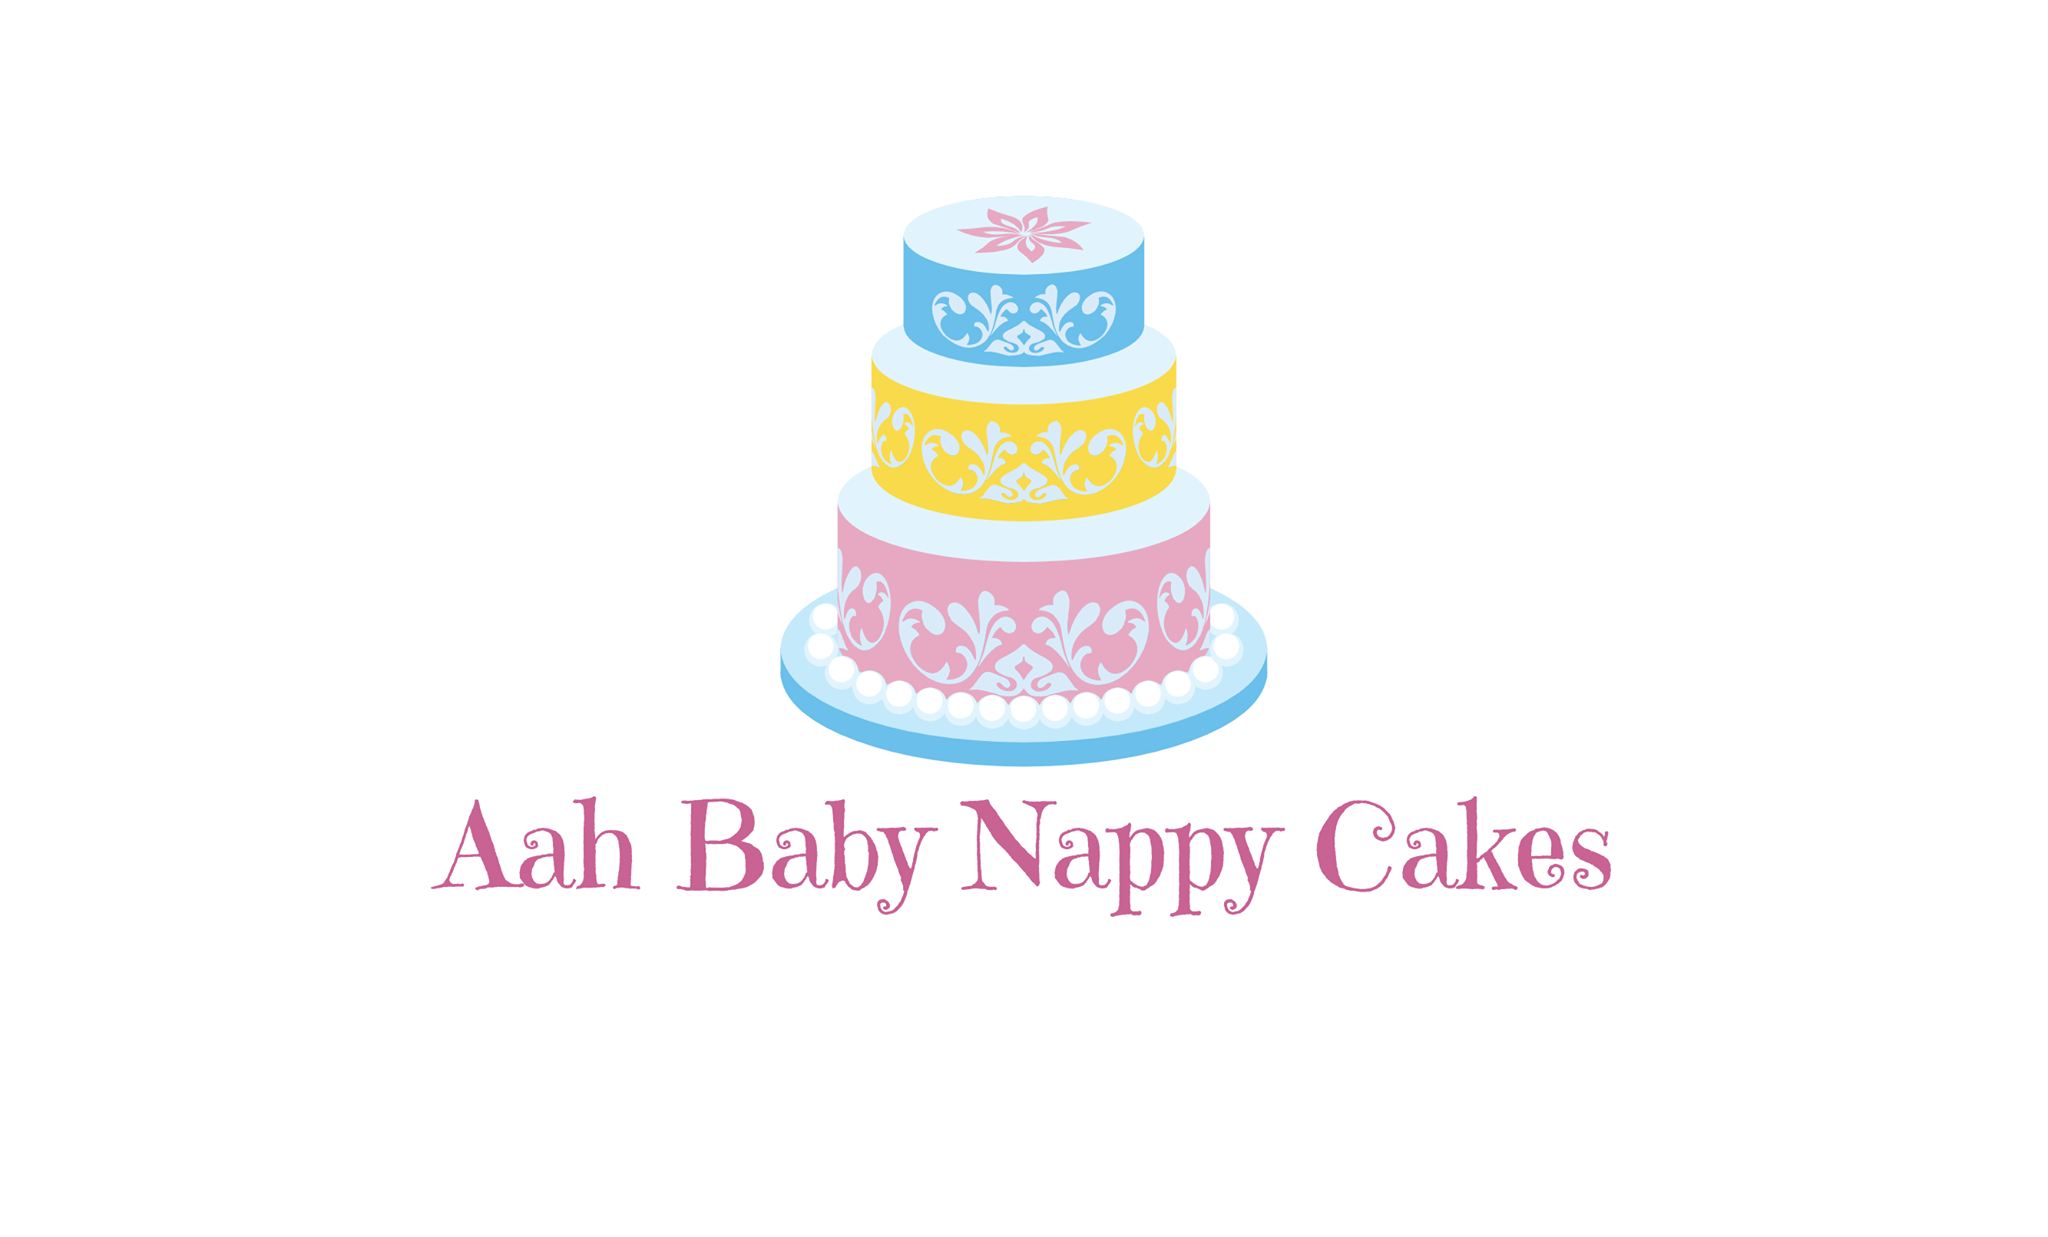 Logo of Aah Baby Nappy Cake Baby Products In Liverpool, Merseyside